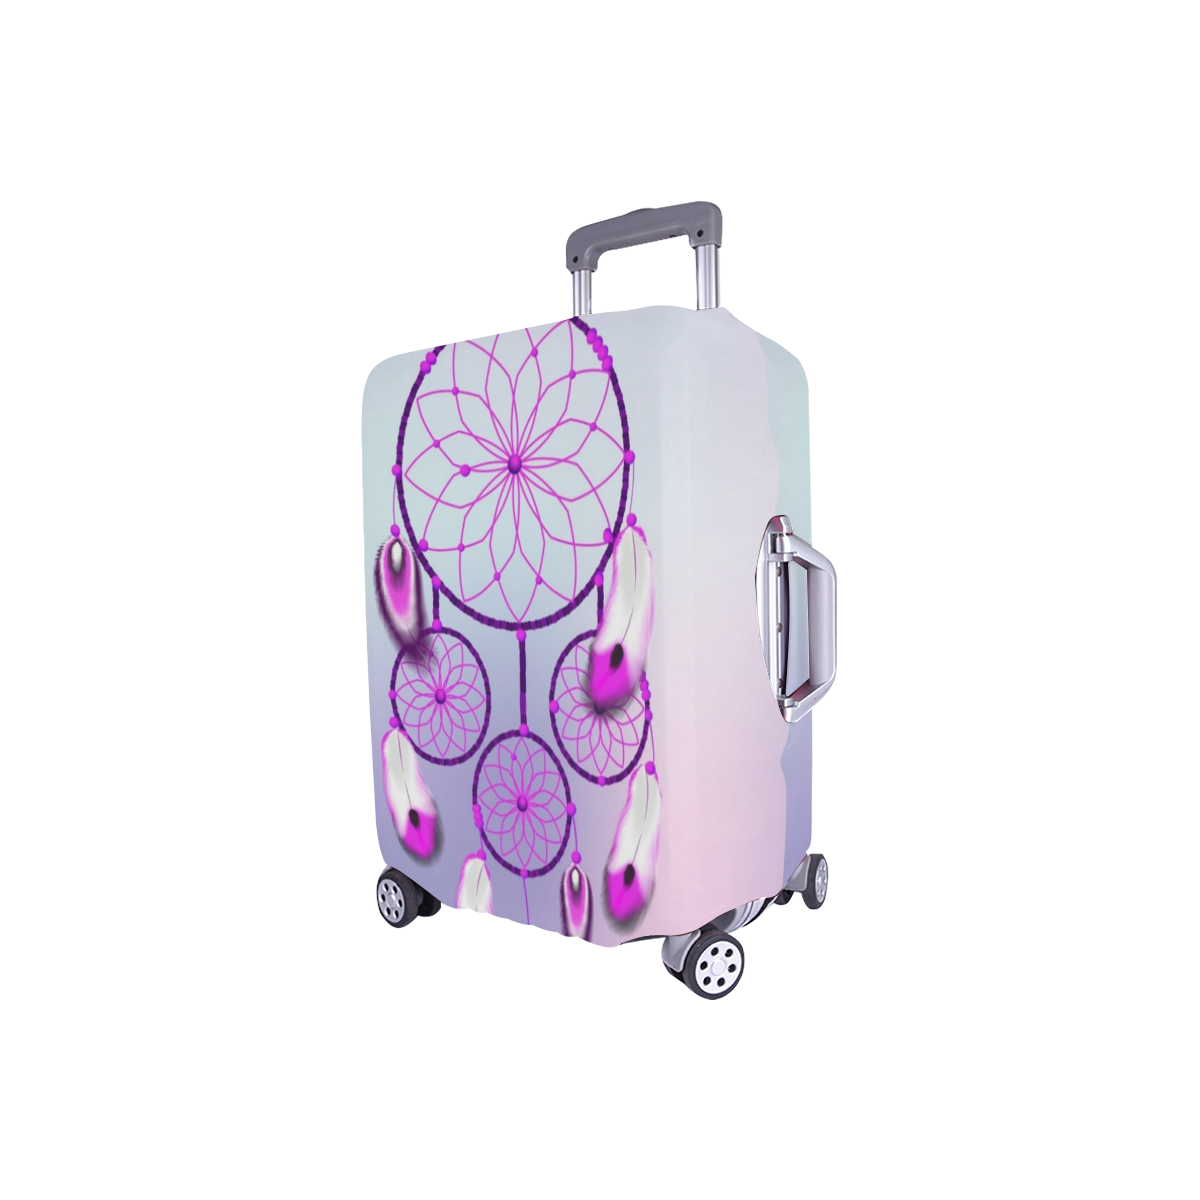 Dreamcatcher Luggage Cover Luggage Cover/Small 18"-21"